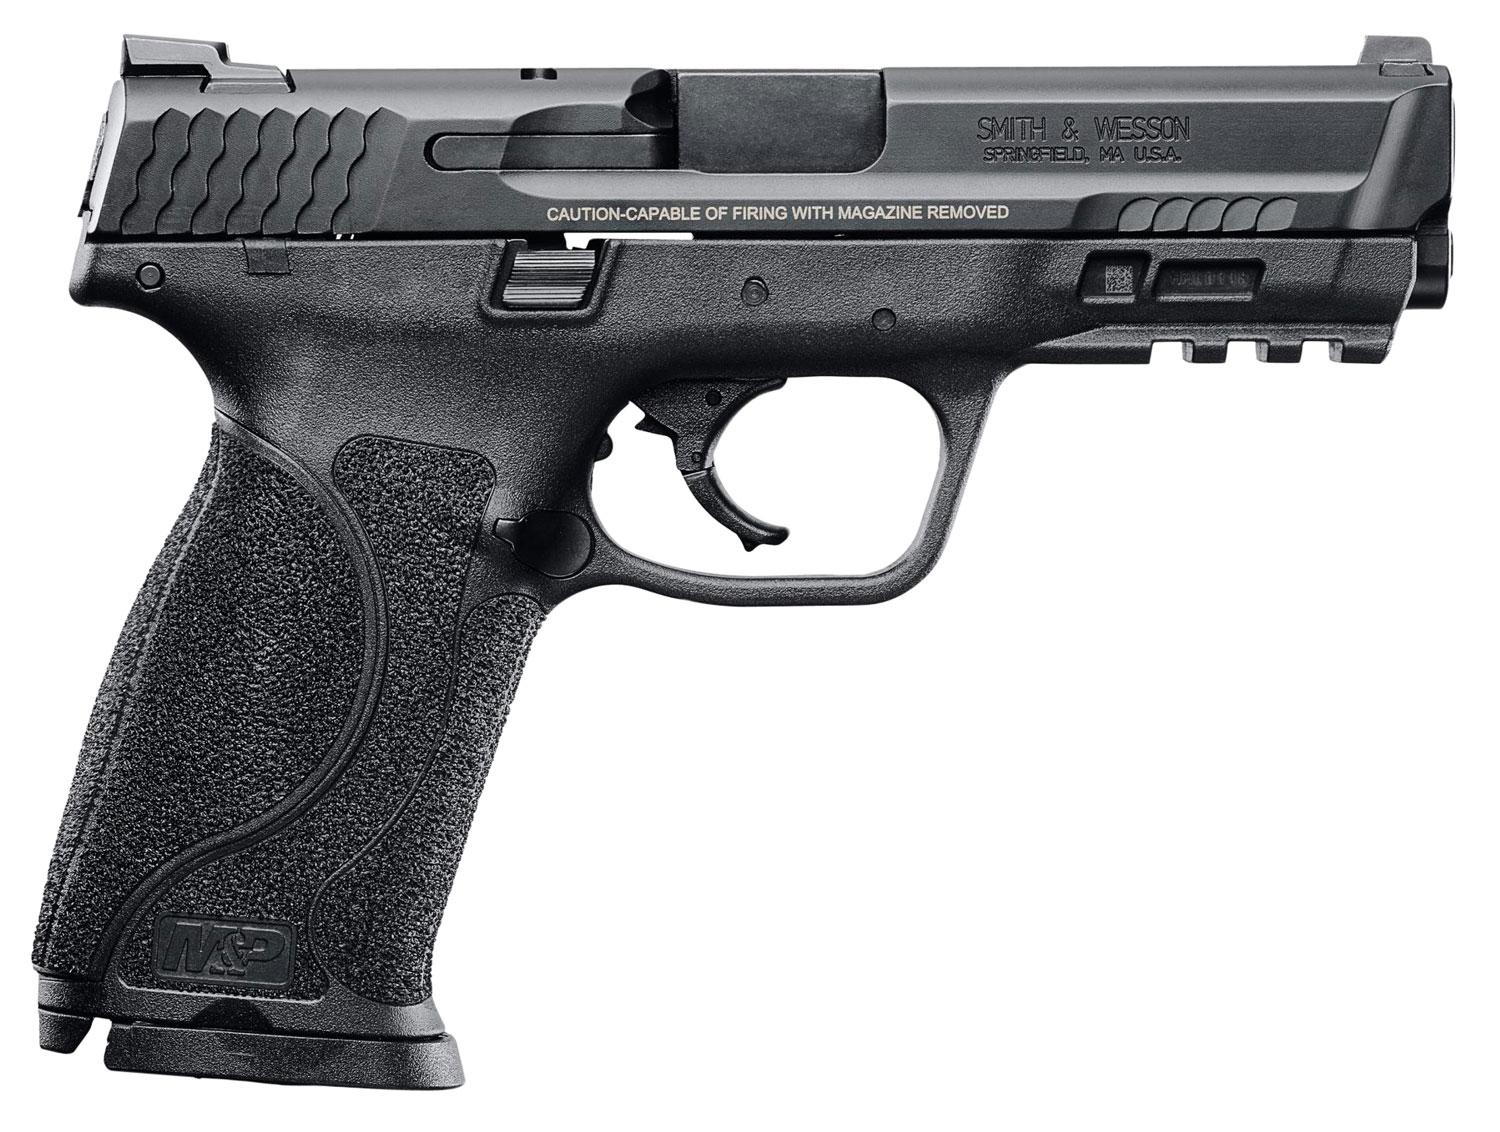  S & W M & P 2.0 40sw 4.25 15rd Blk Nms